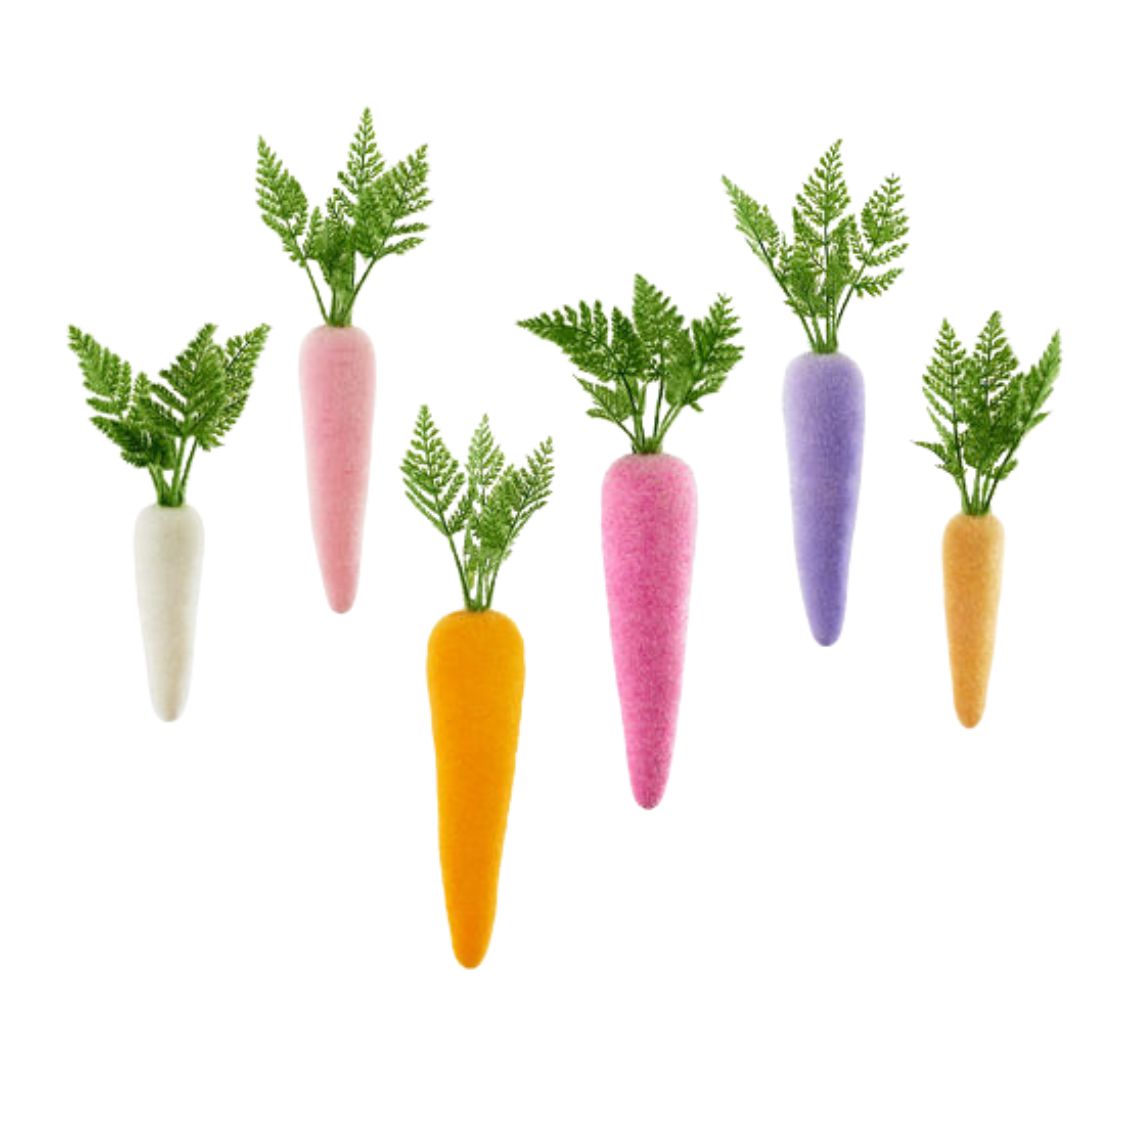 Flocked Colored Carrots - 6 styles/colors - The Preppy Bunny